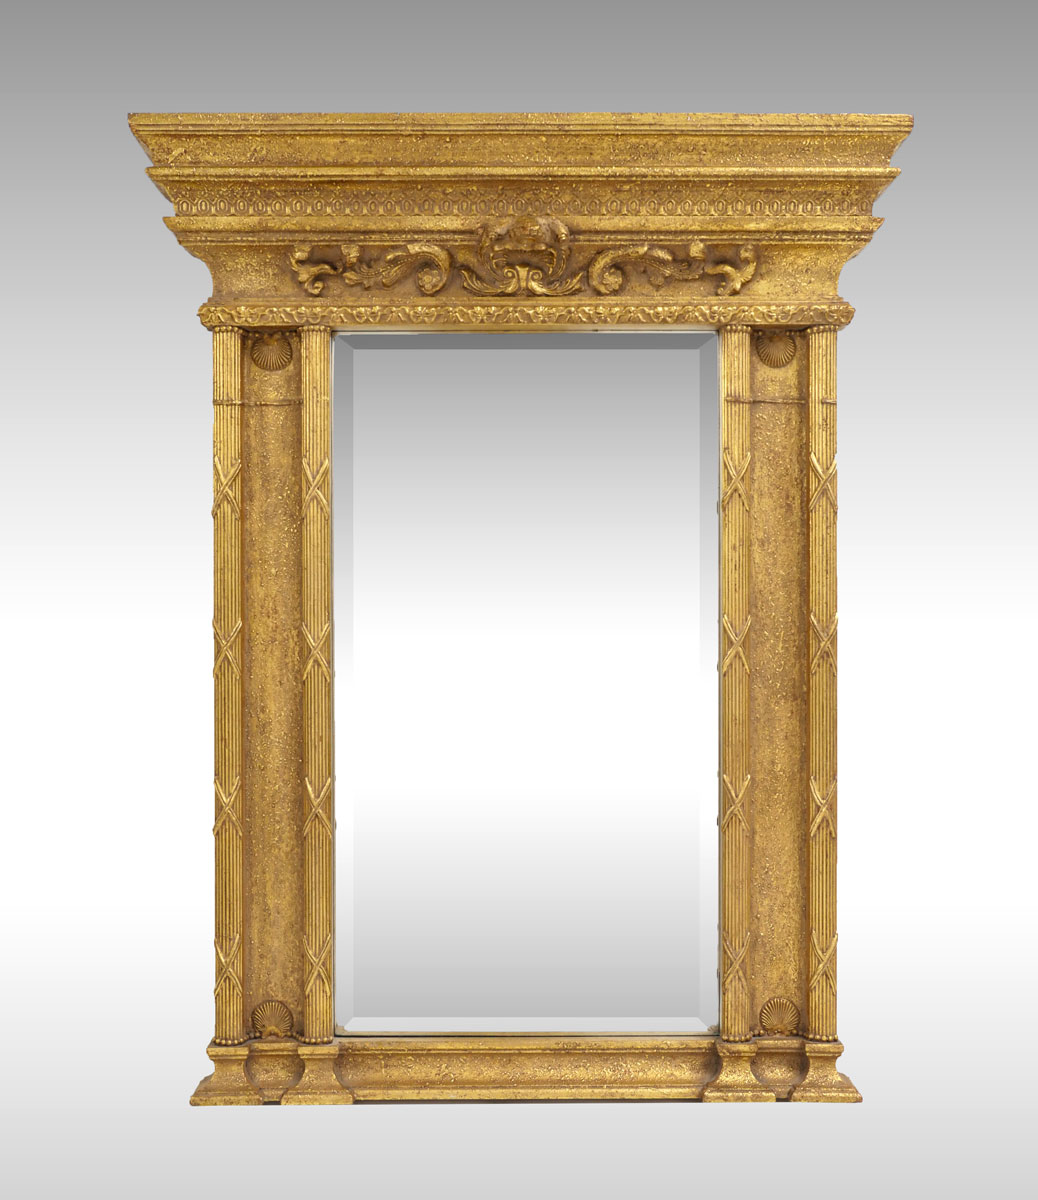 LARGE GOLD MIRROR: Large mirror with